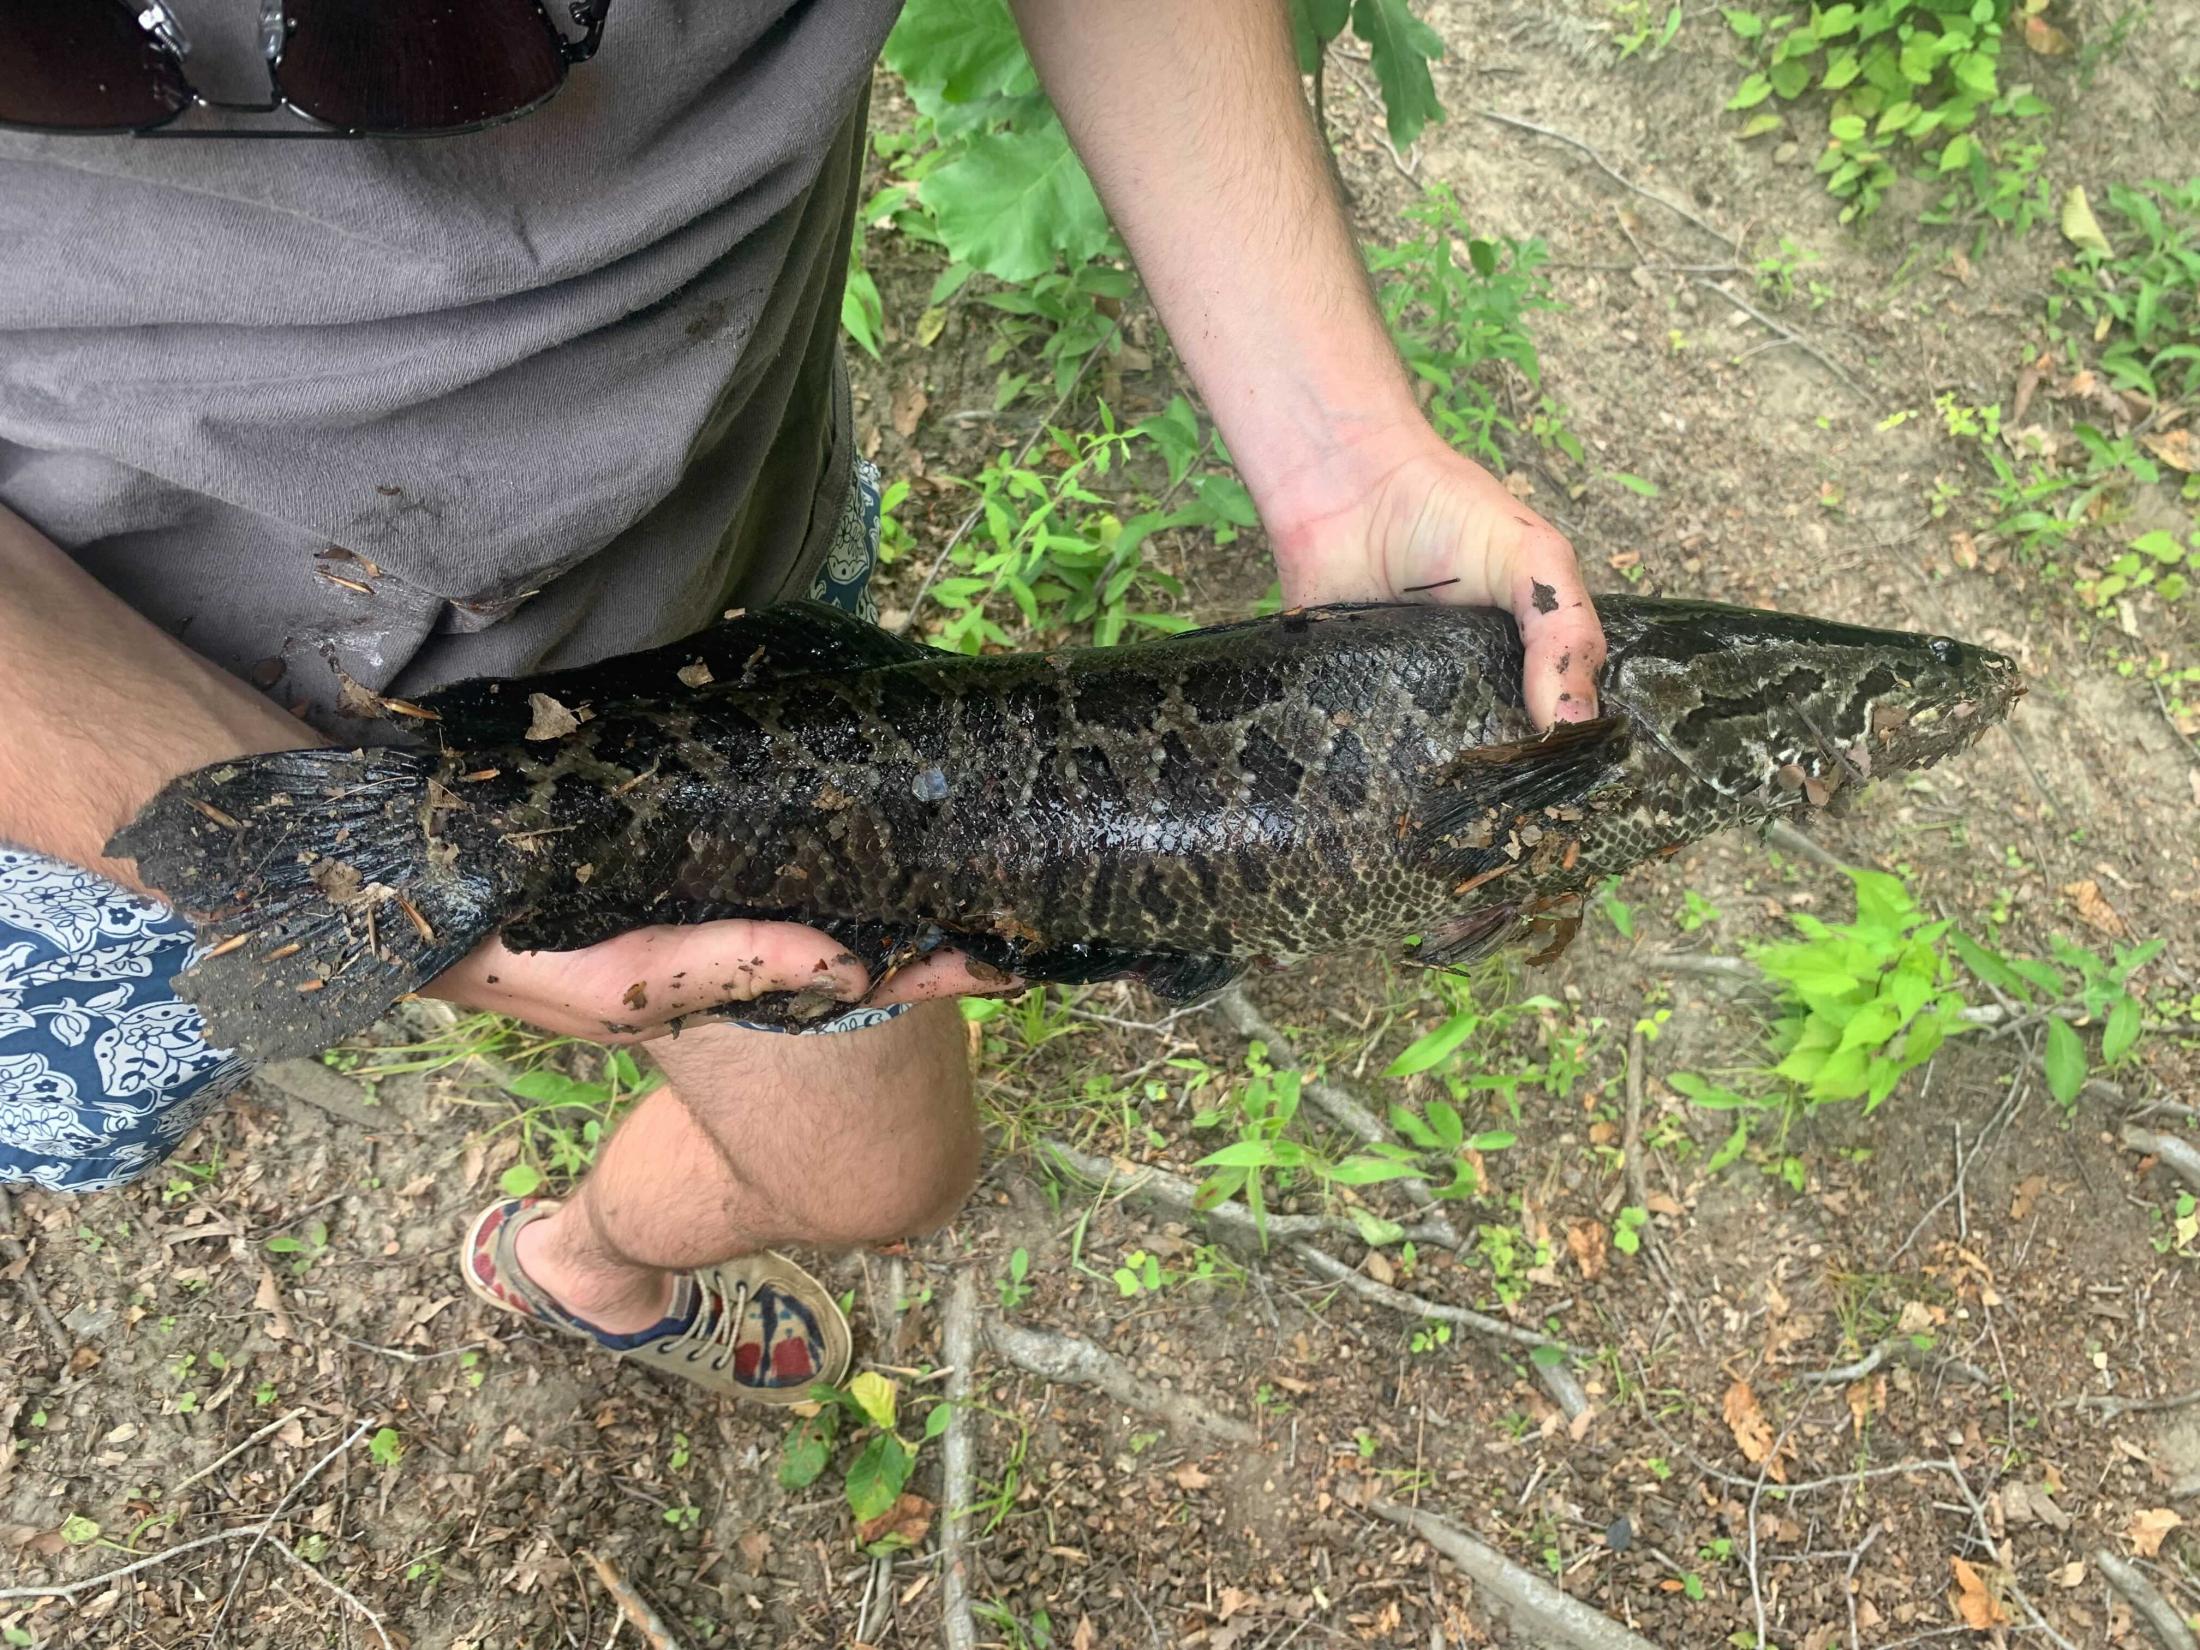 The Northern Snakehead: Ugly to Look At, But Delicious and Sustainable to  Eat